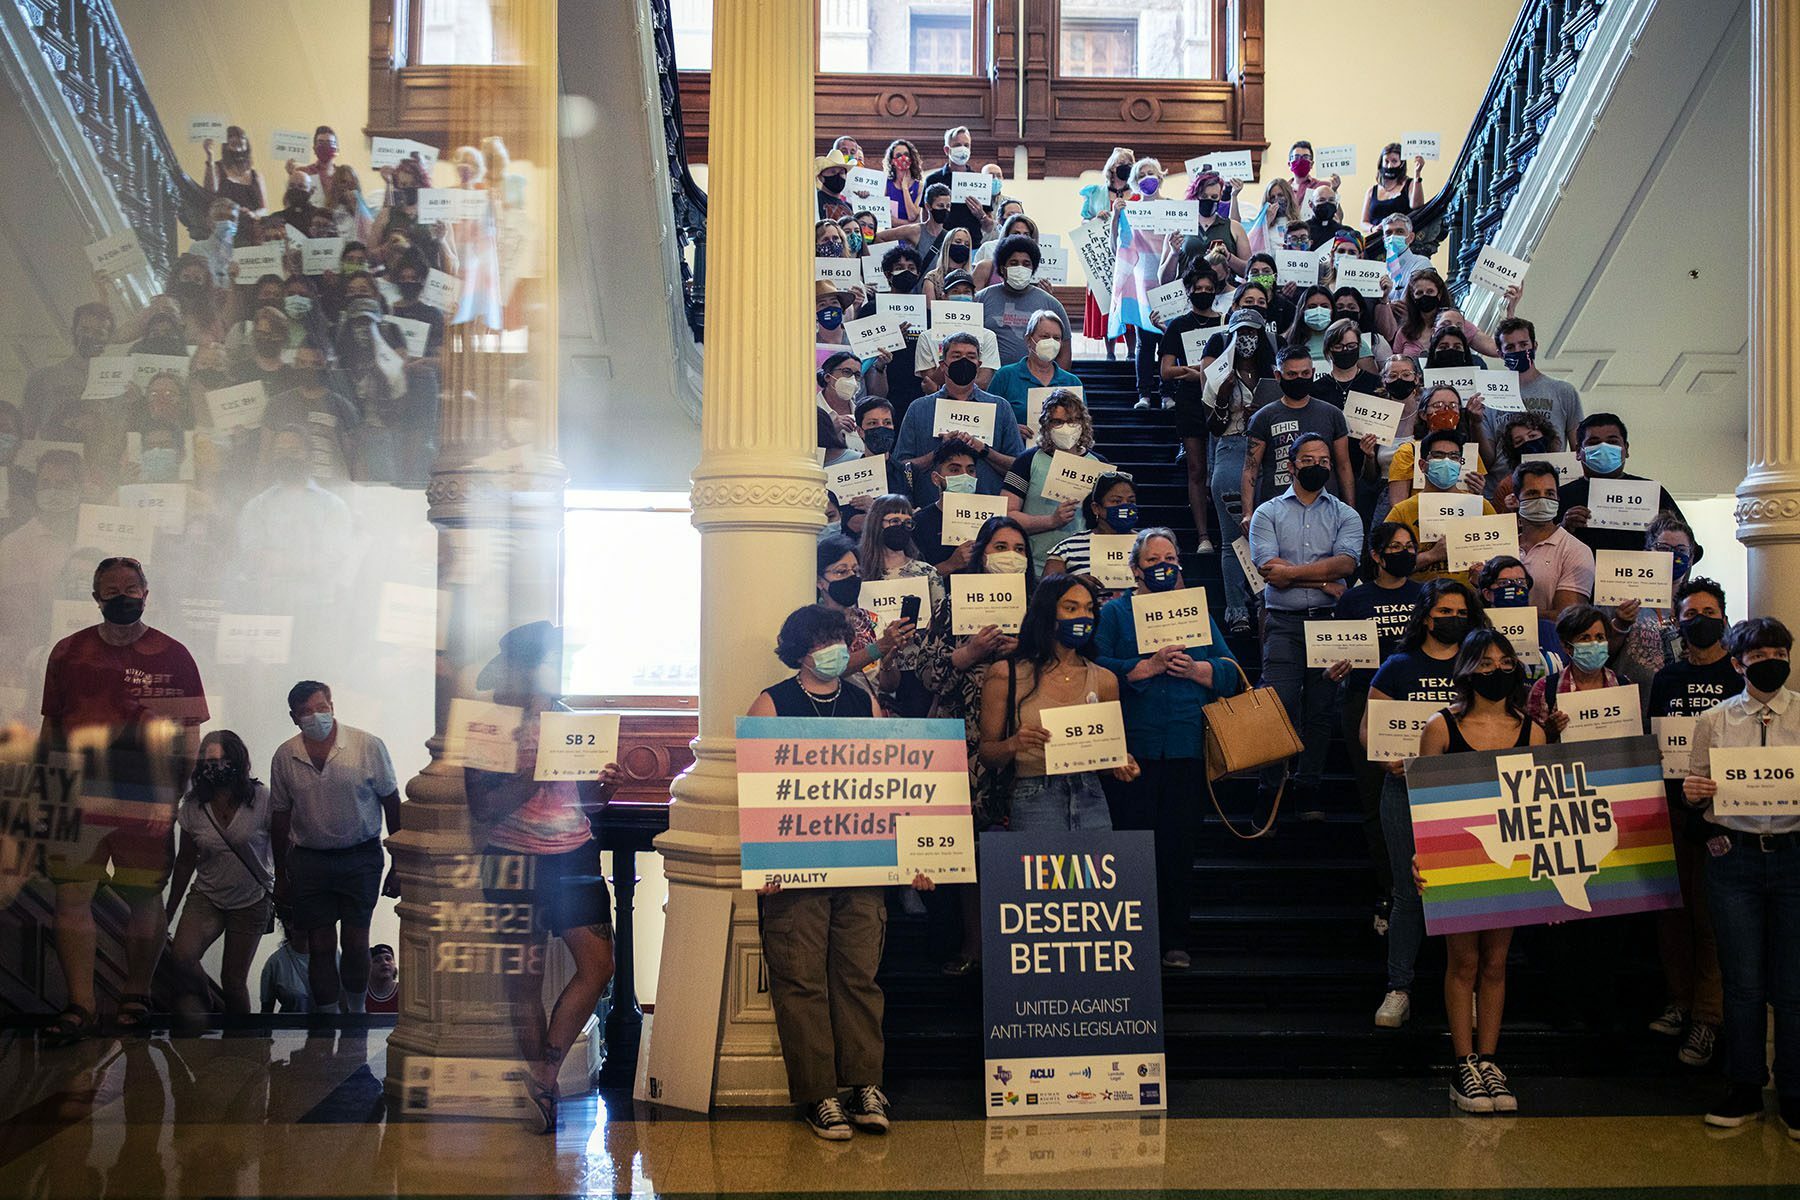 LGBTQ+ rights supporters inside the Texas State Capitol. Many hold signs, some read 